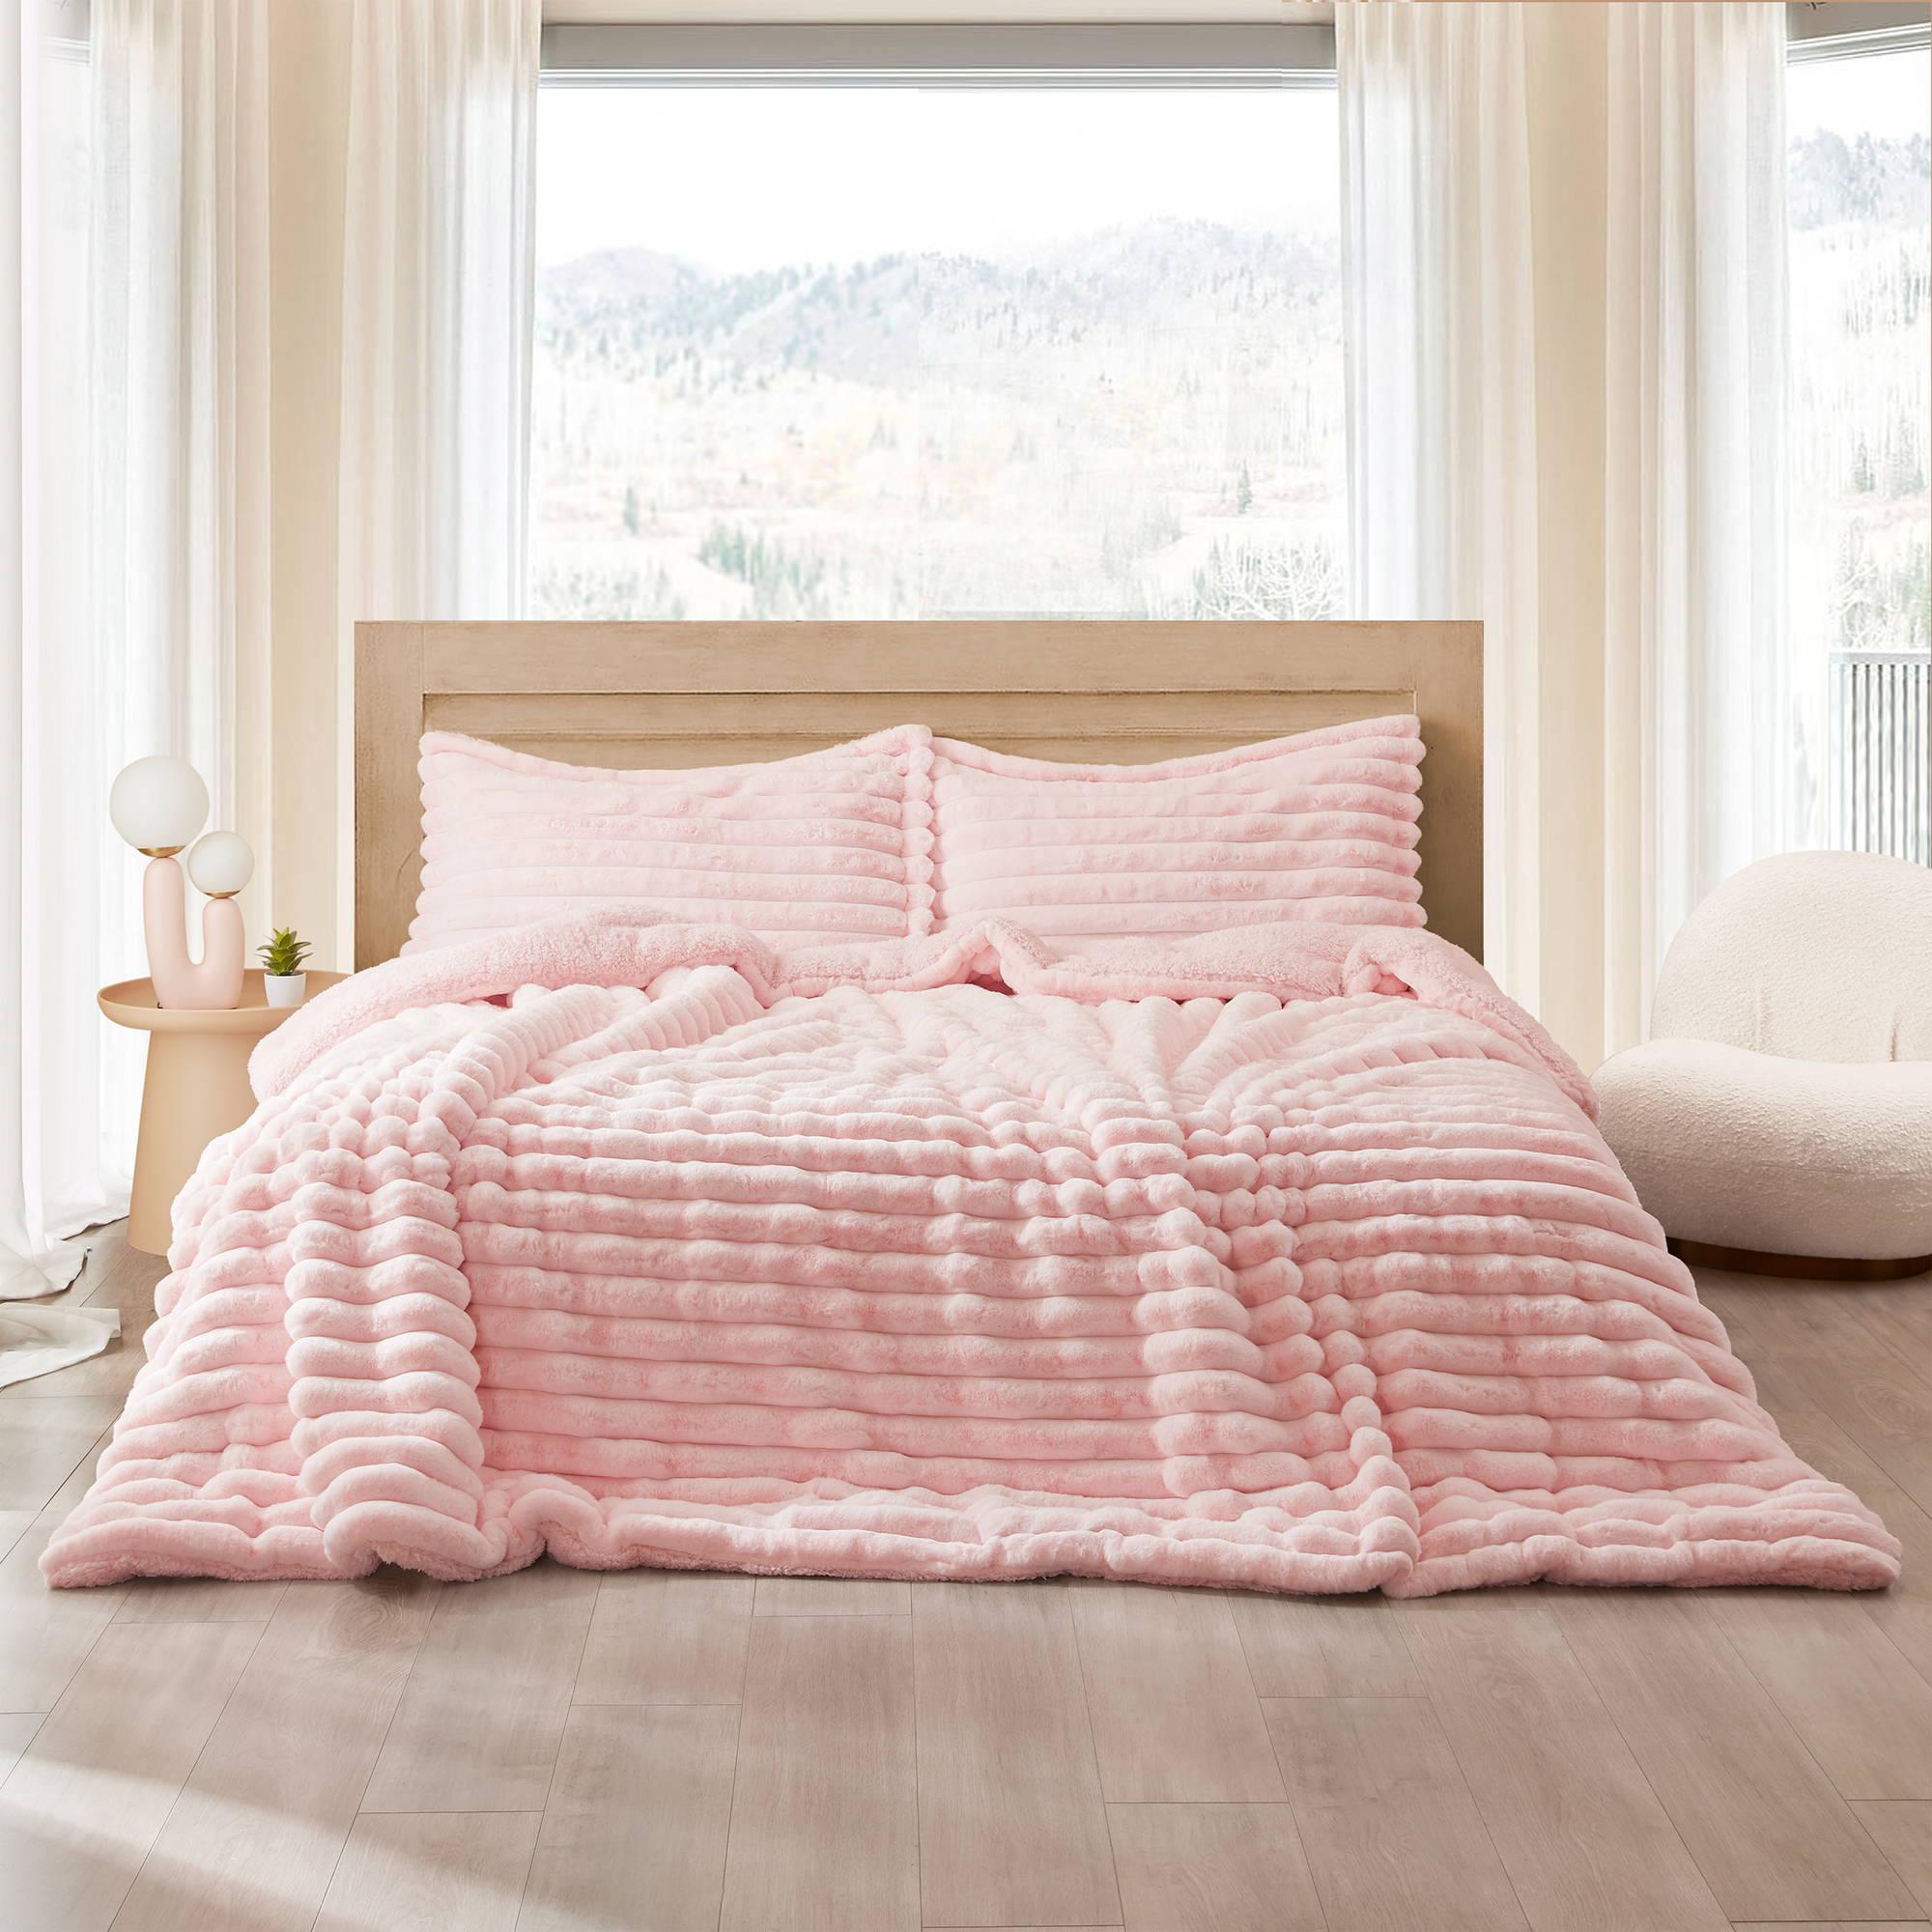 Roll Cakes Chunky Bunny - Coma Inducer Oversized Comforter - Heavenly Pink